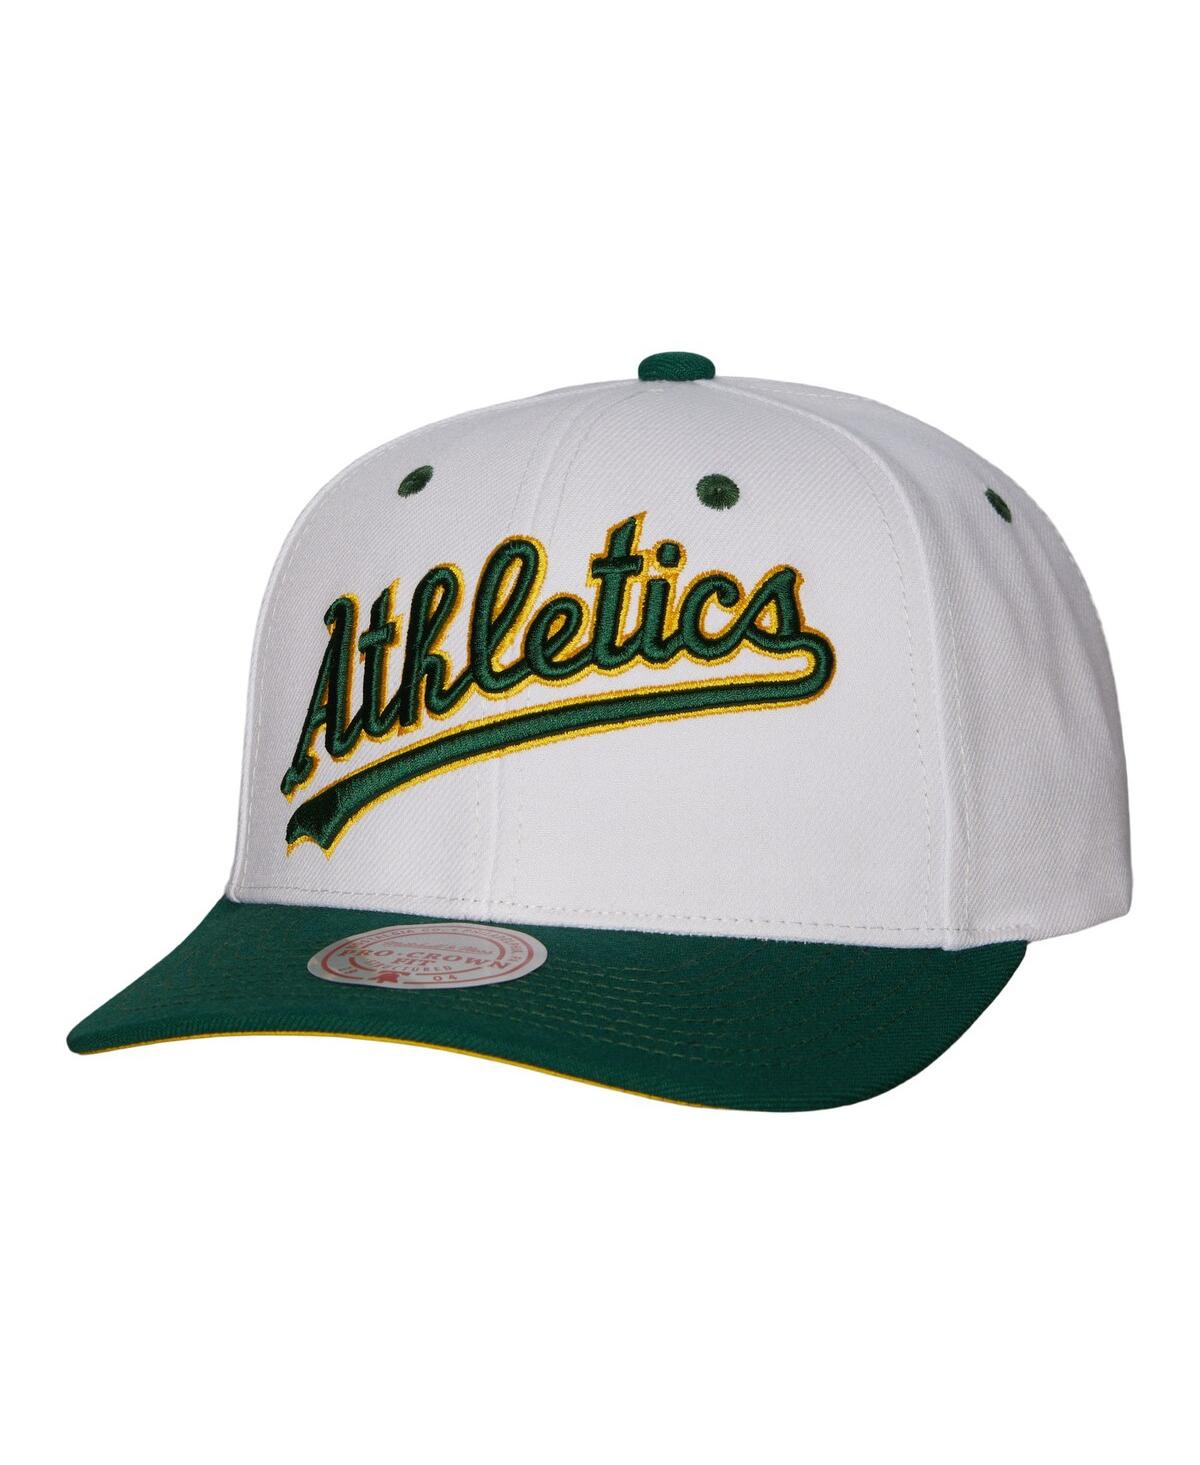 Mitchell & Ness Men's  White Oakland Athletics Cooperstown Collection Pro Crown Snapback Hat